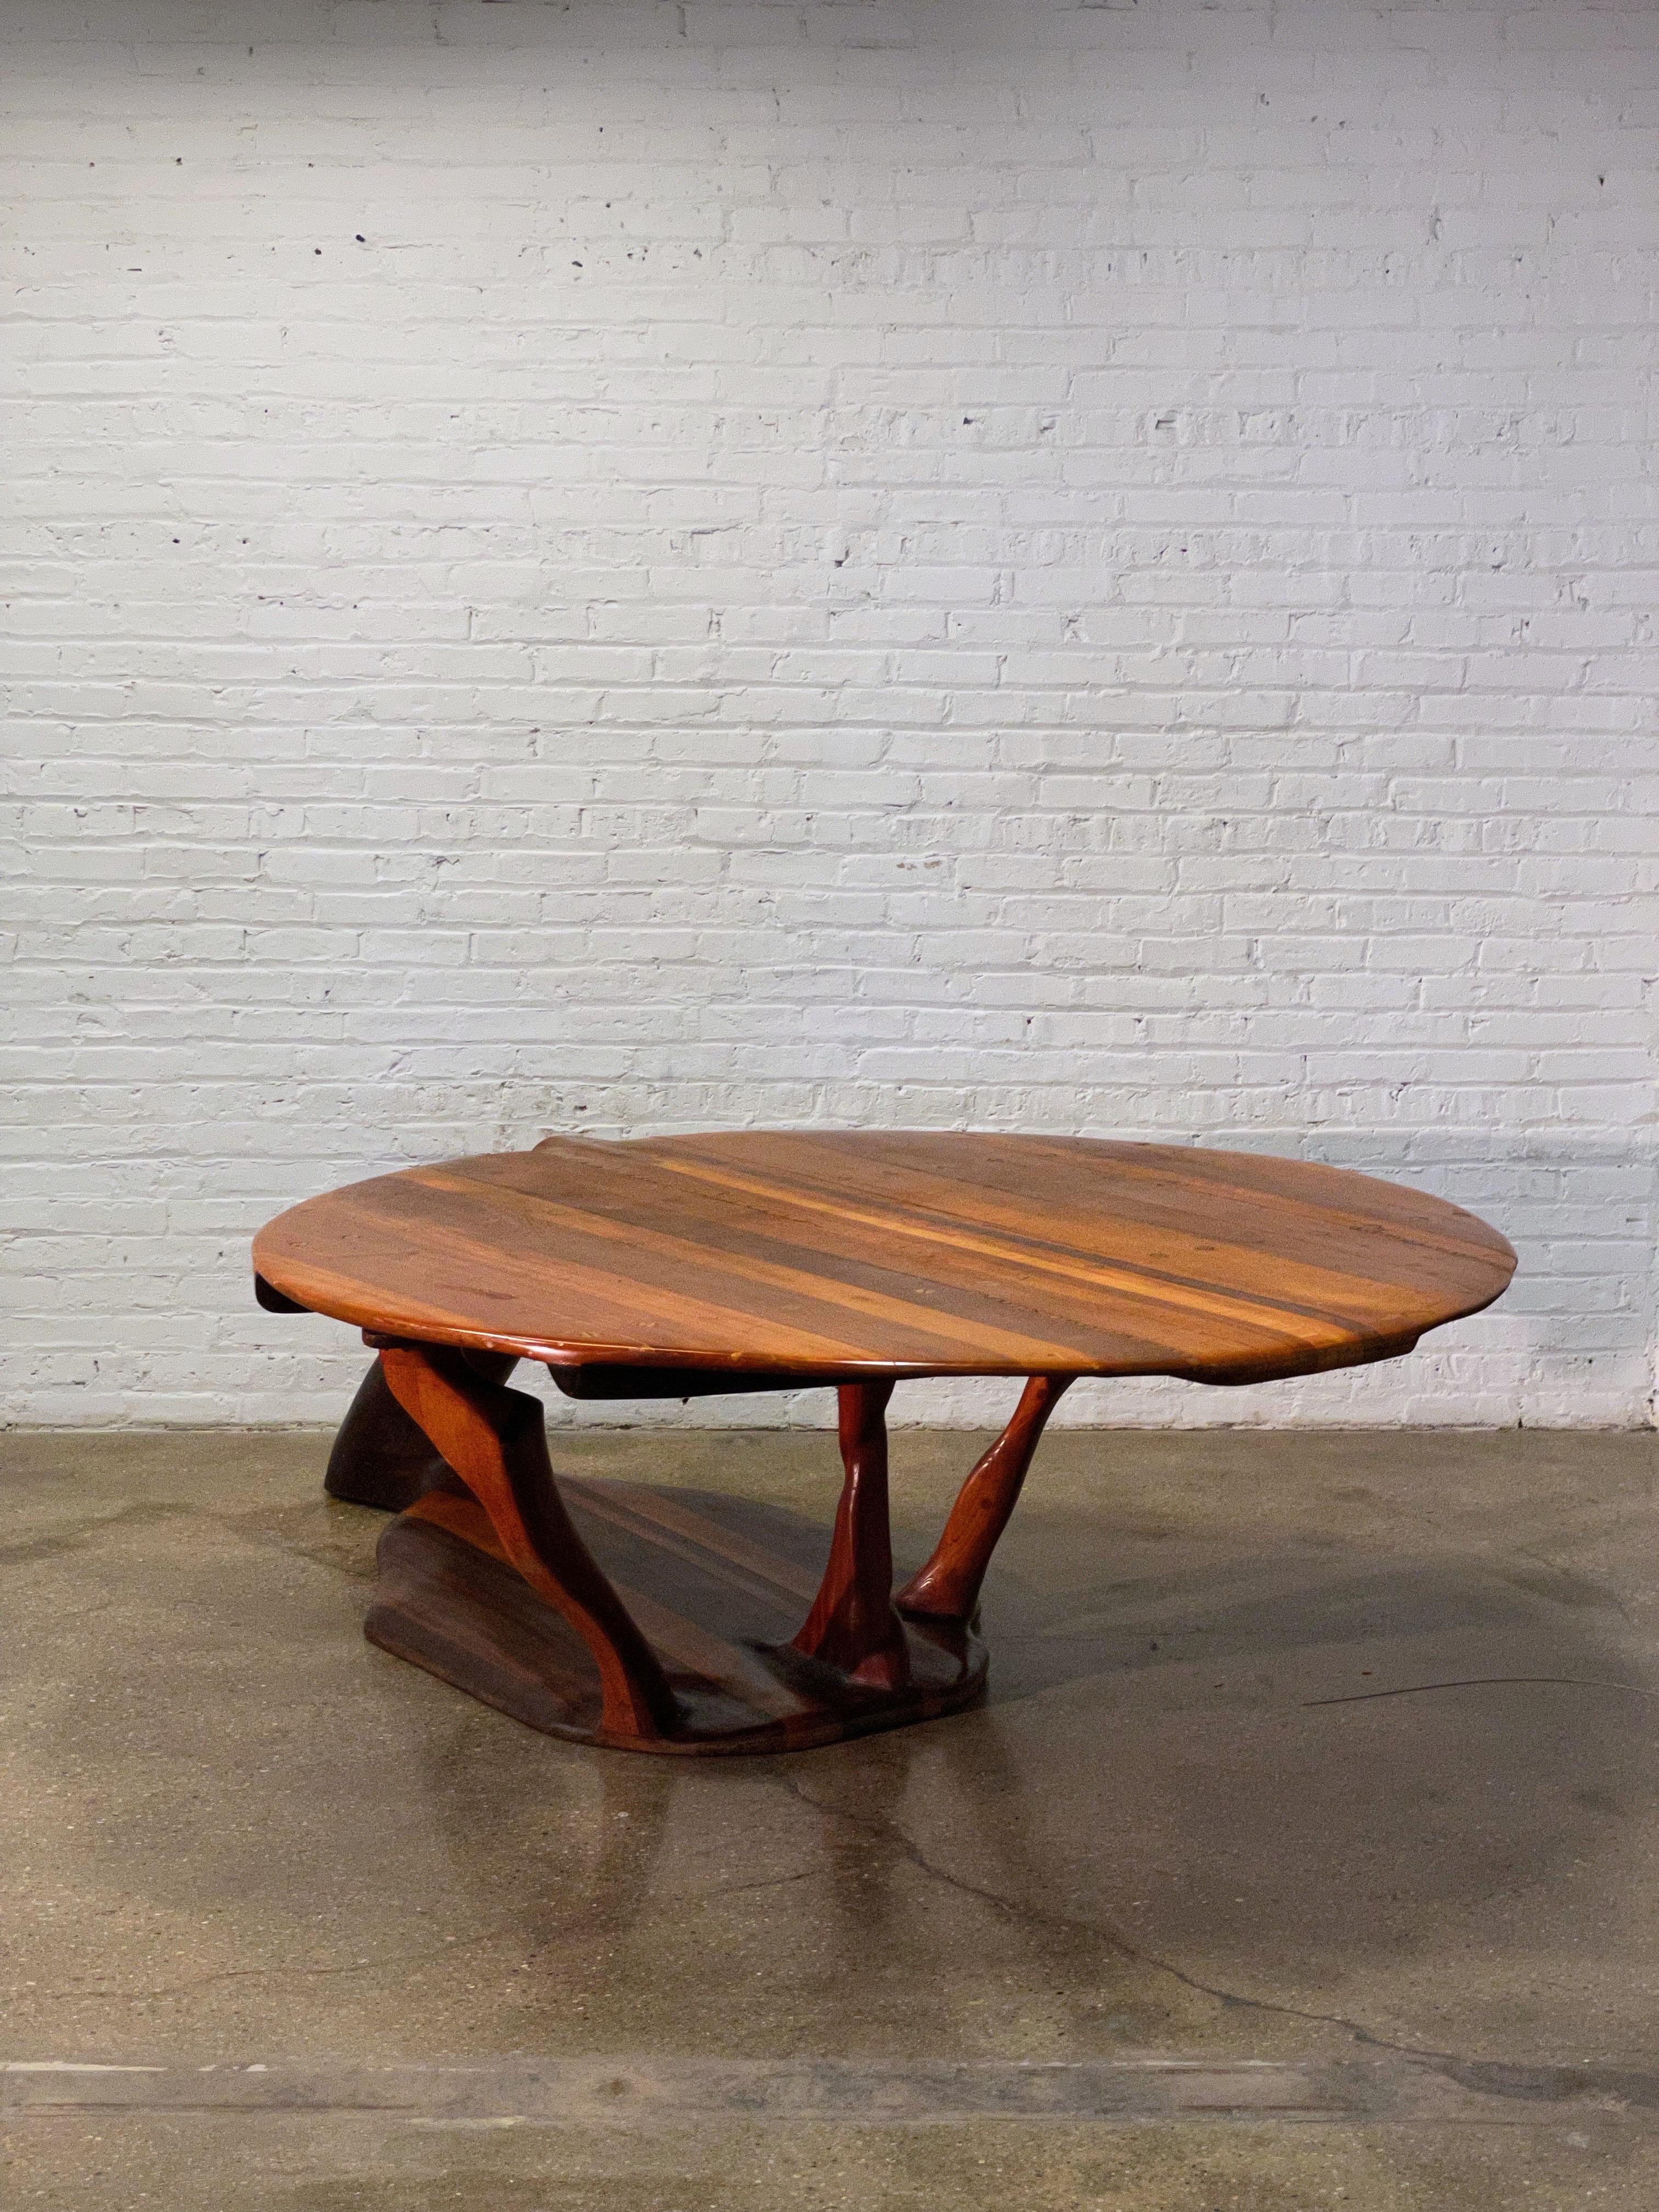 American Craftsman One Of A Kind Sculptural Studio Craft Dining Table For Sale